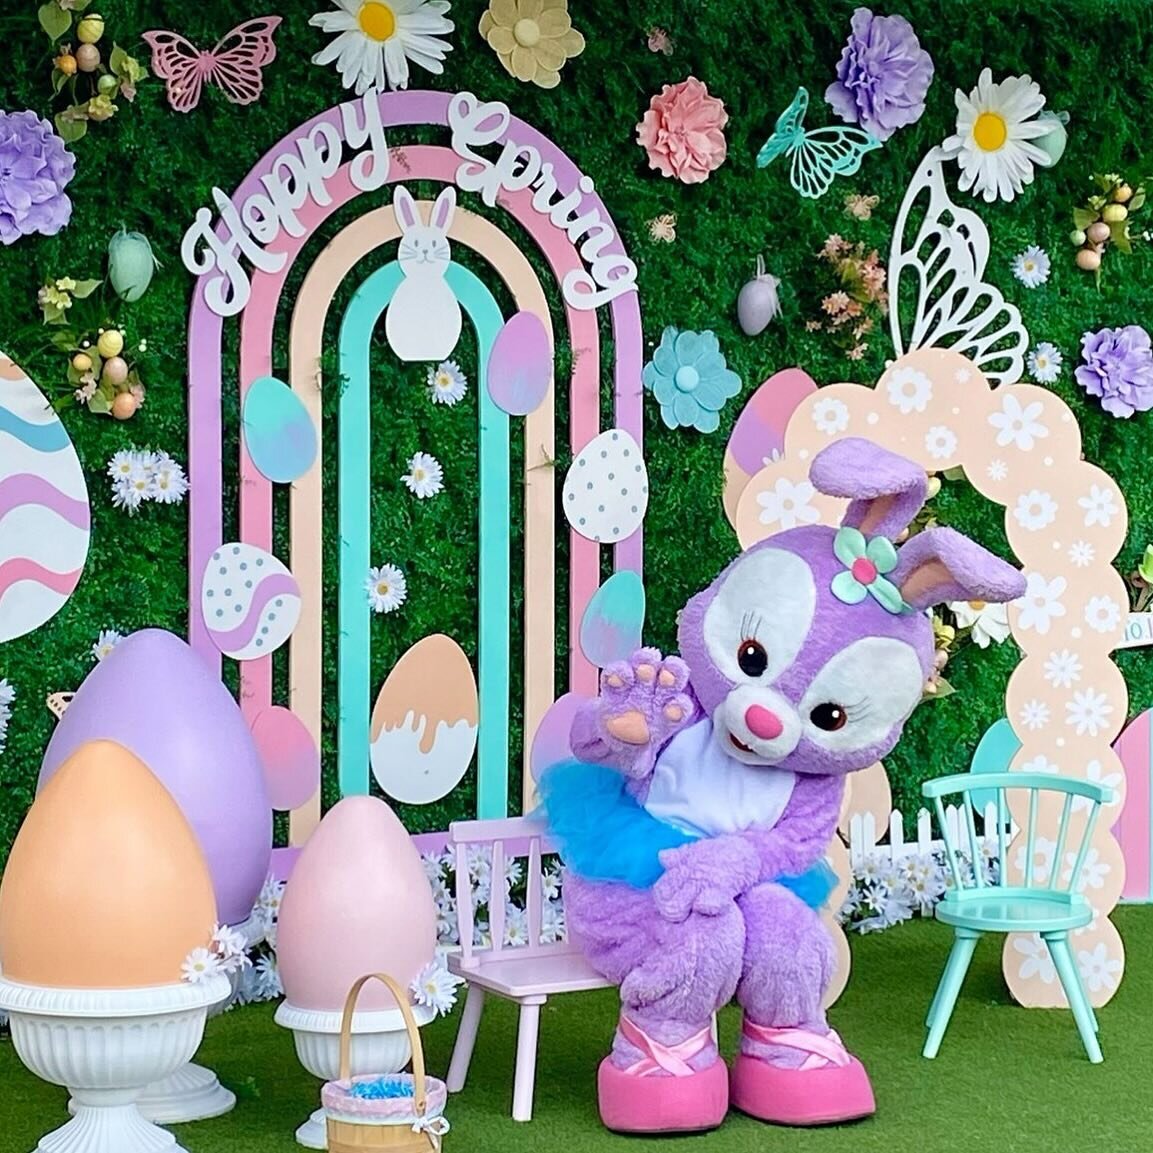 Bella the Bunny will be hopping by Bella Terra to take photos with families!

📍 On the Green in front of the Century Theaters
📸 This year photos are complimentary, and it&rsquo;s first come, first serve. No appointment needed. Share photos instantl